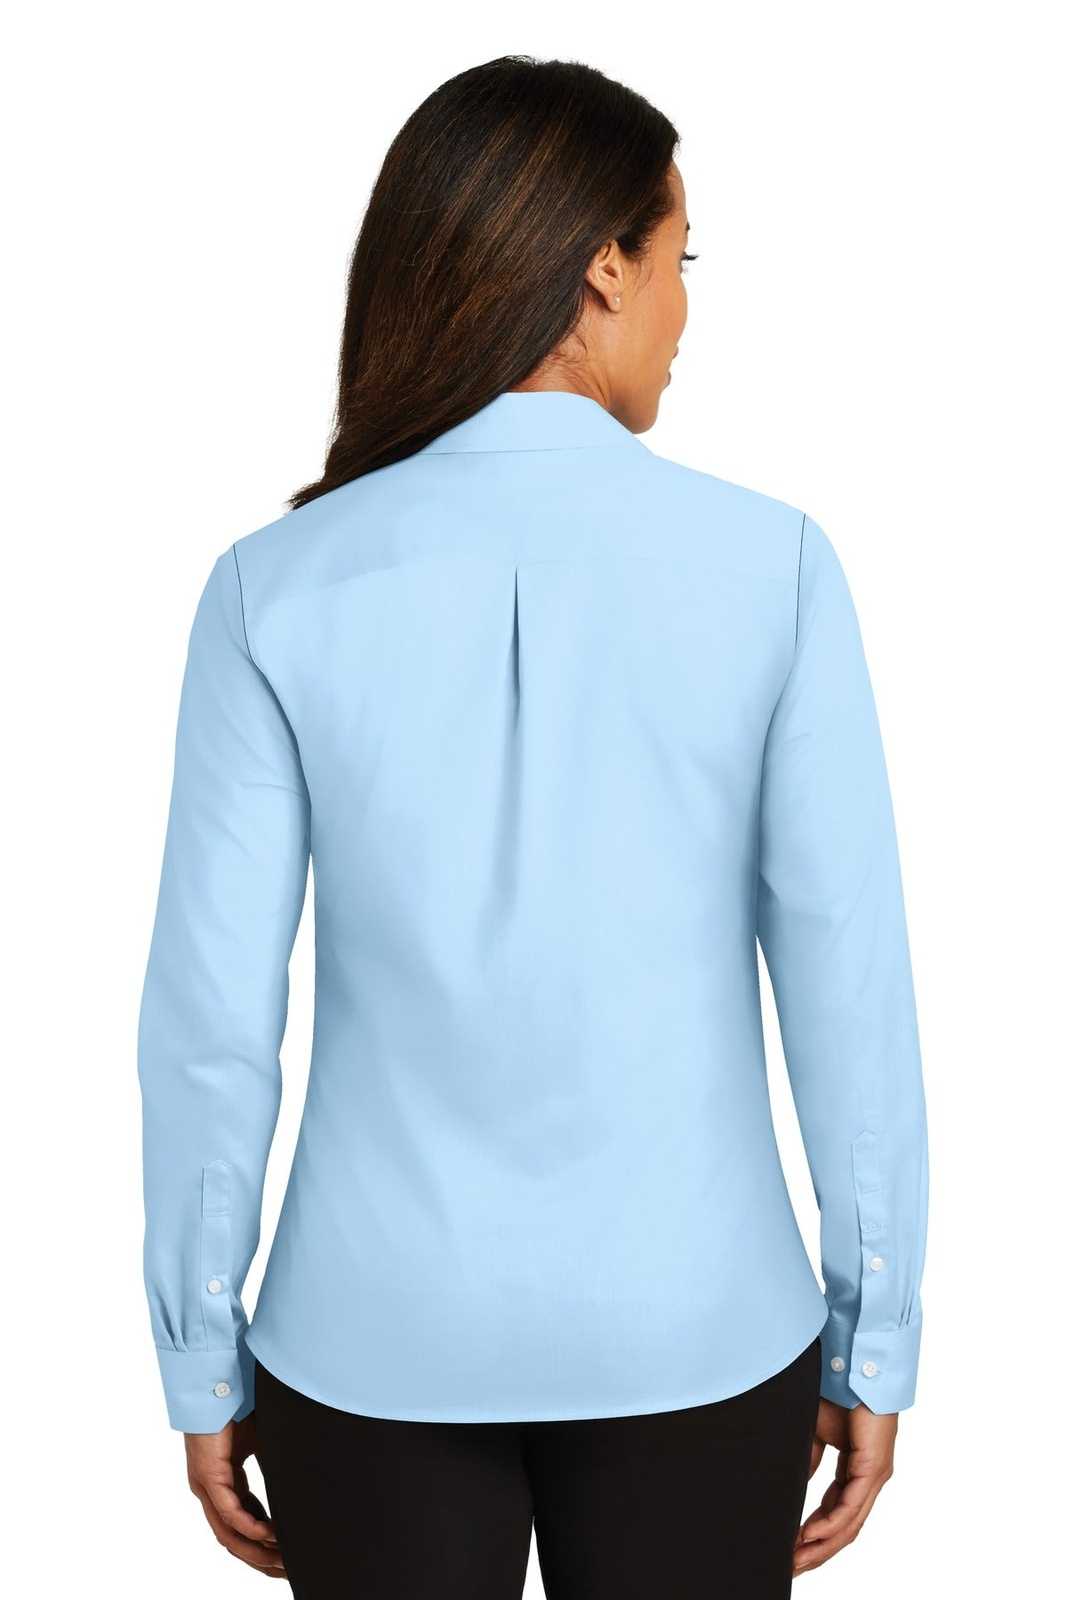 Red House RH79 Ladies Non-Iron Twill Shirt - Heritage Blue - HIT a Double - 1